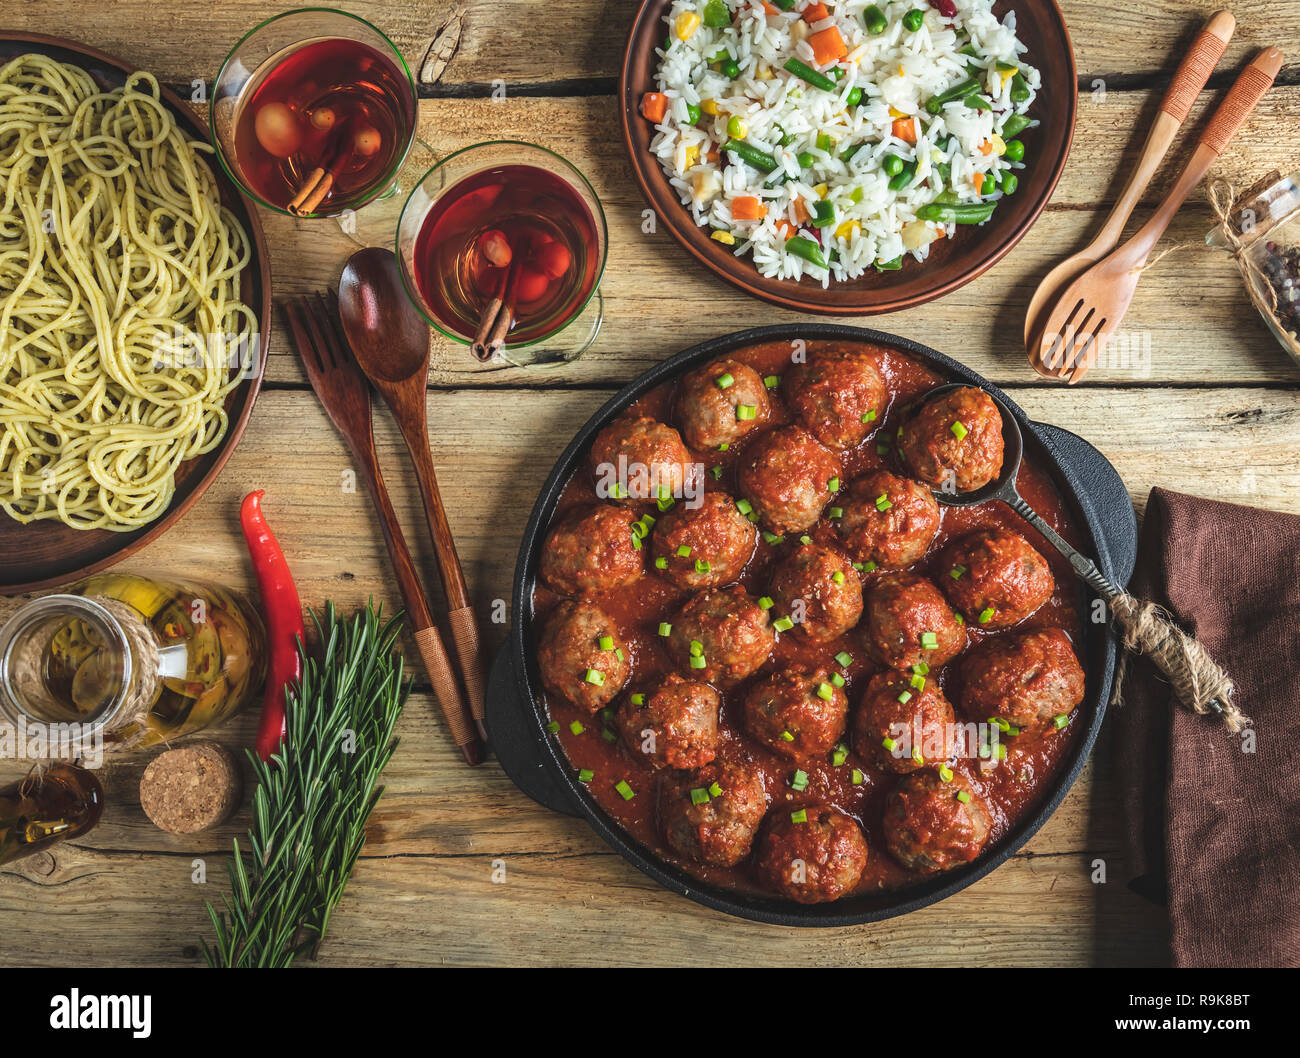 Homemade meatballs in tomato sauce. Frying pan on a wooden surface, rice with vegetables, pasta Stock Photo